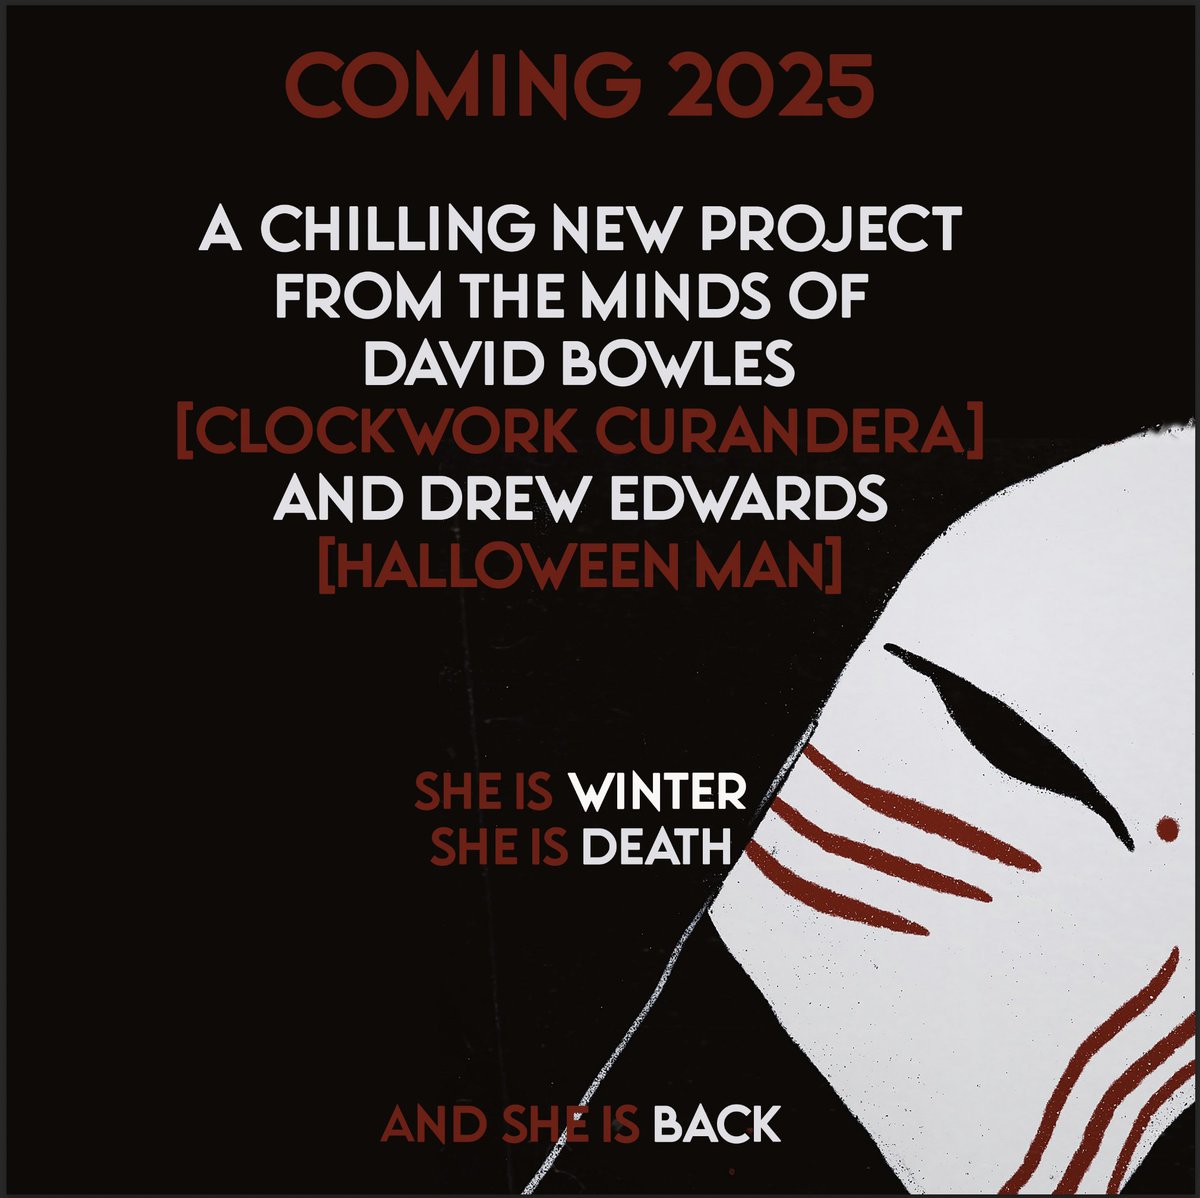 I am proud to be working with one of my favorite writers to create an all-new horror icon. Stay tuned for more details. The Matron is slashing your way in 2025!